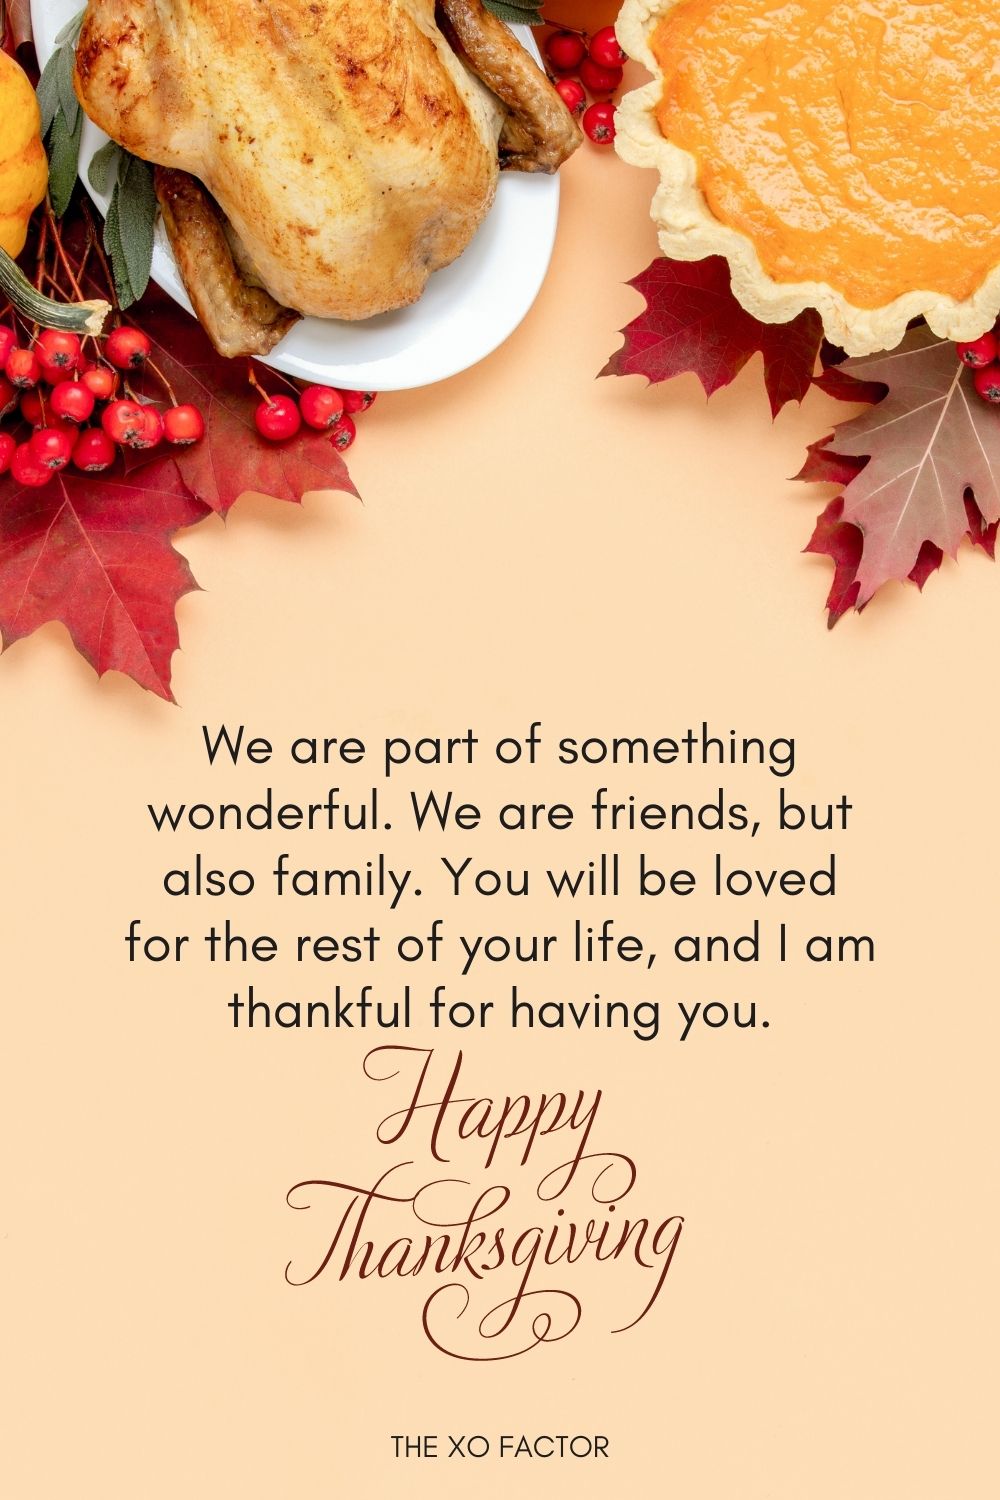 We are part of something wonderful. We are friends, but also family. You will be loved for the rest of your life, and I am thankful for having you. Happy Thanksgiving.